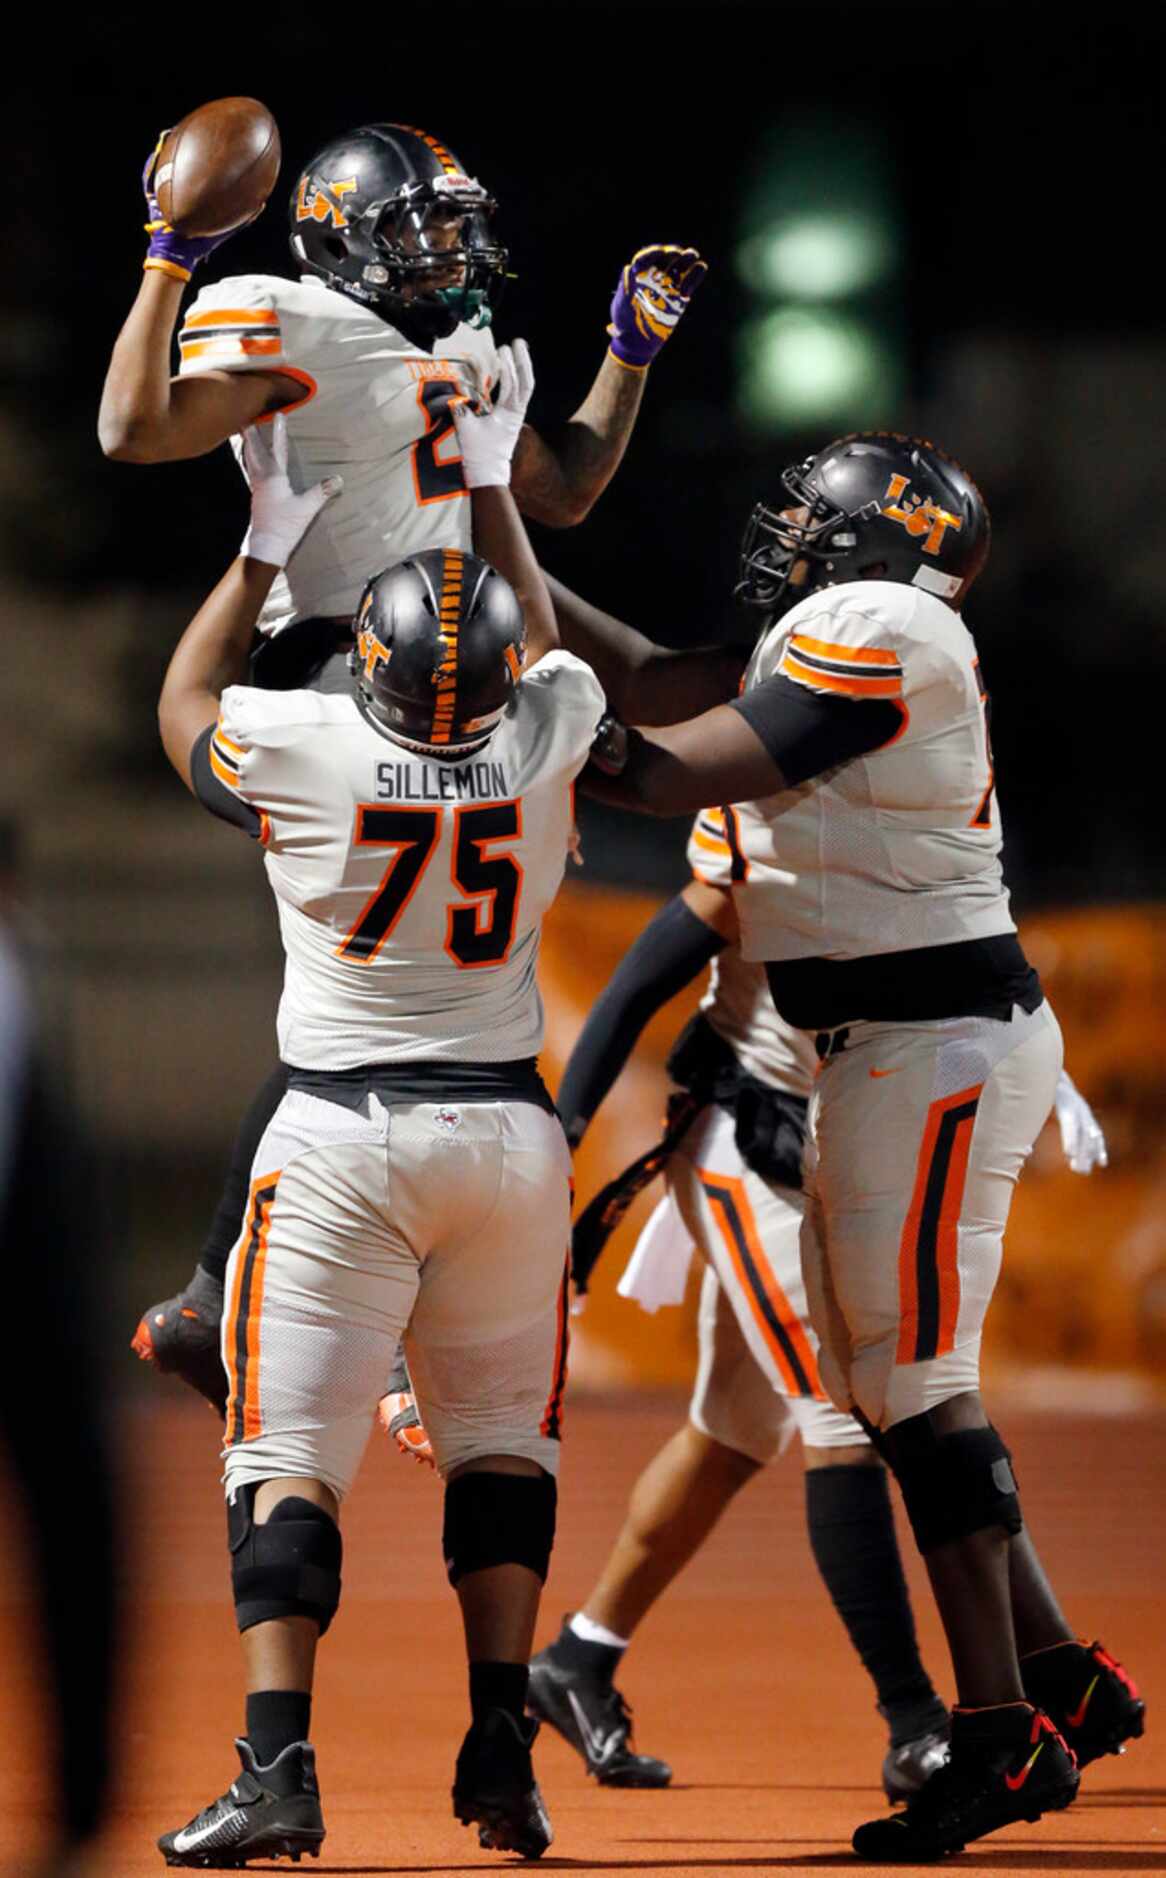 Lancaster running back Tre Bradford (2) is hoisted into the air by lineman Isaiah Sillemon...